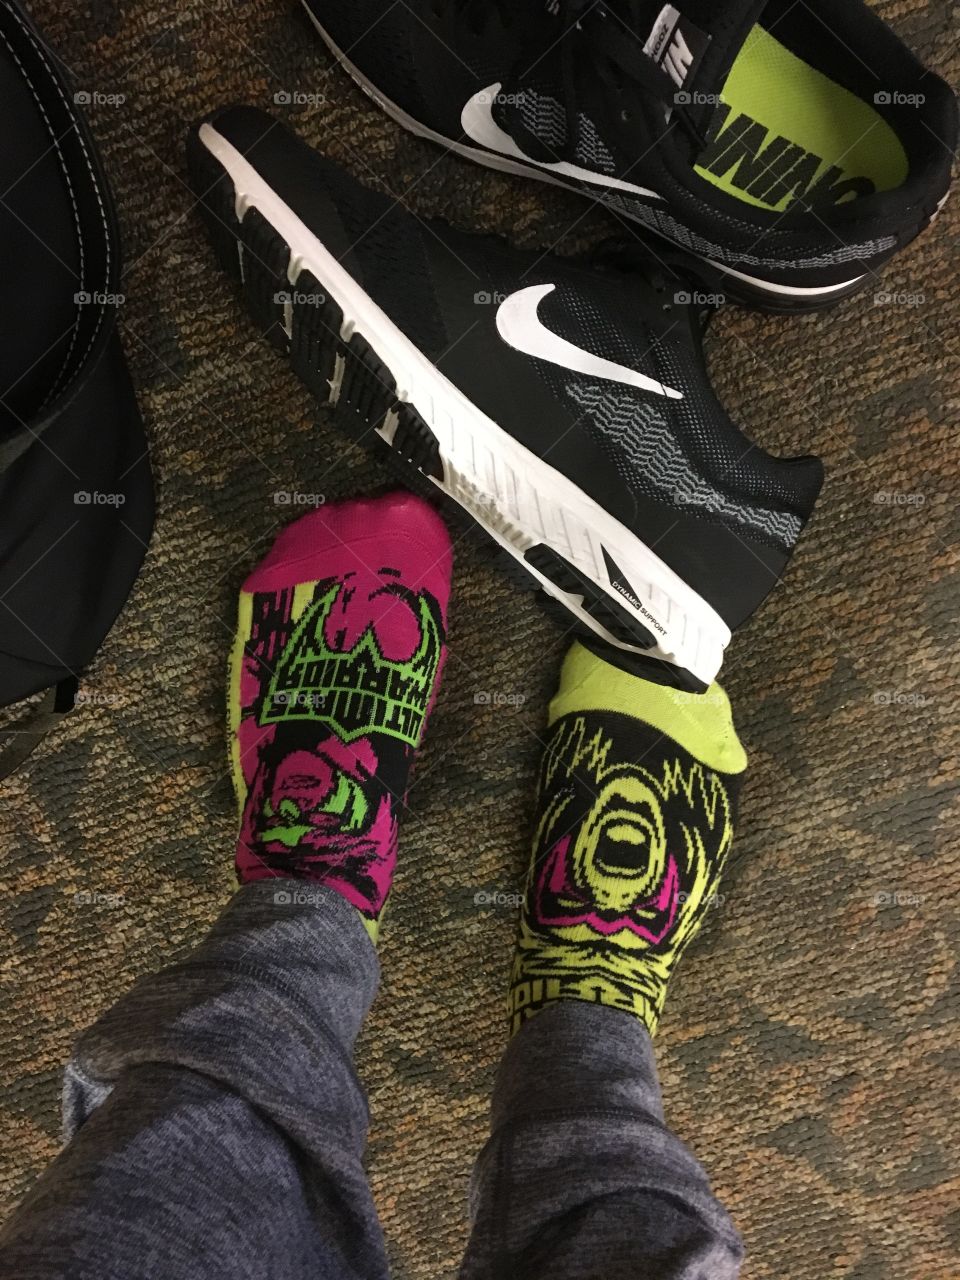 That embarrassing moment when you realize you wore two different ultimate warrior socks to the gym